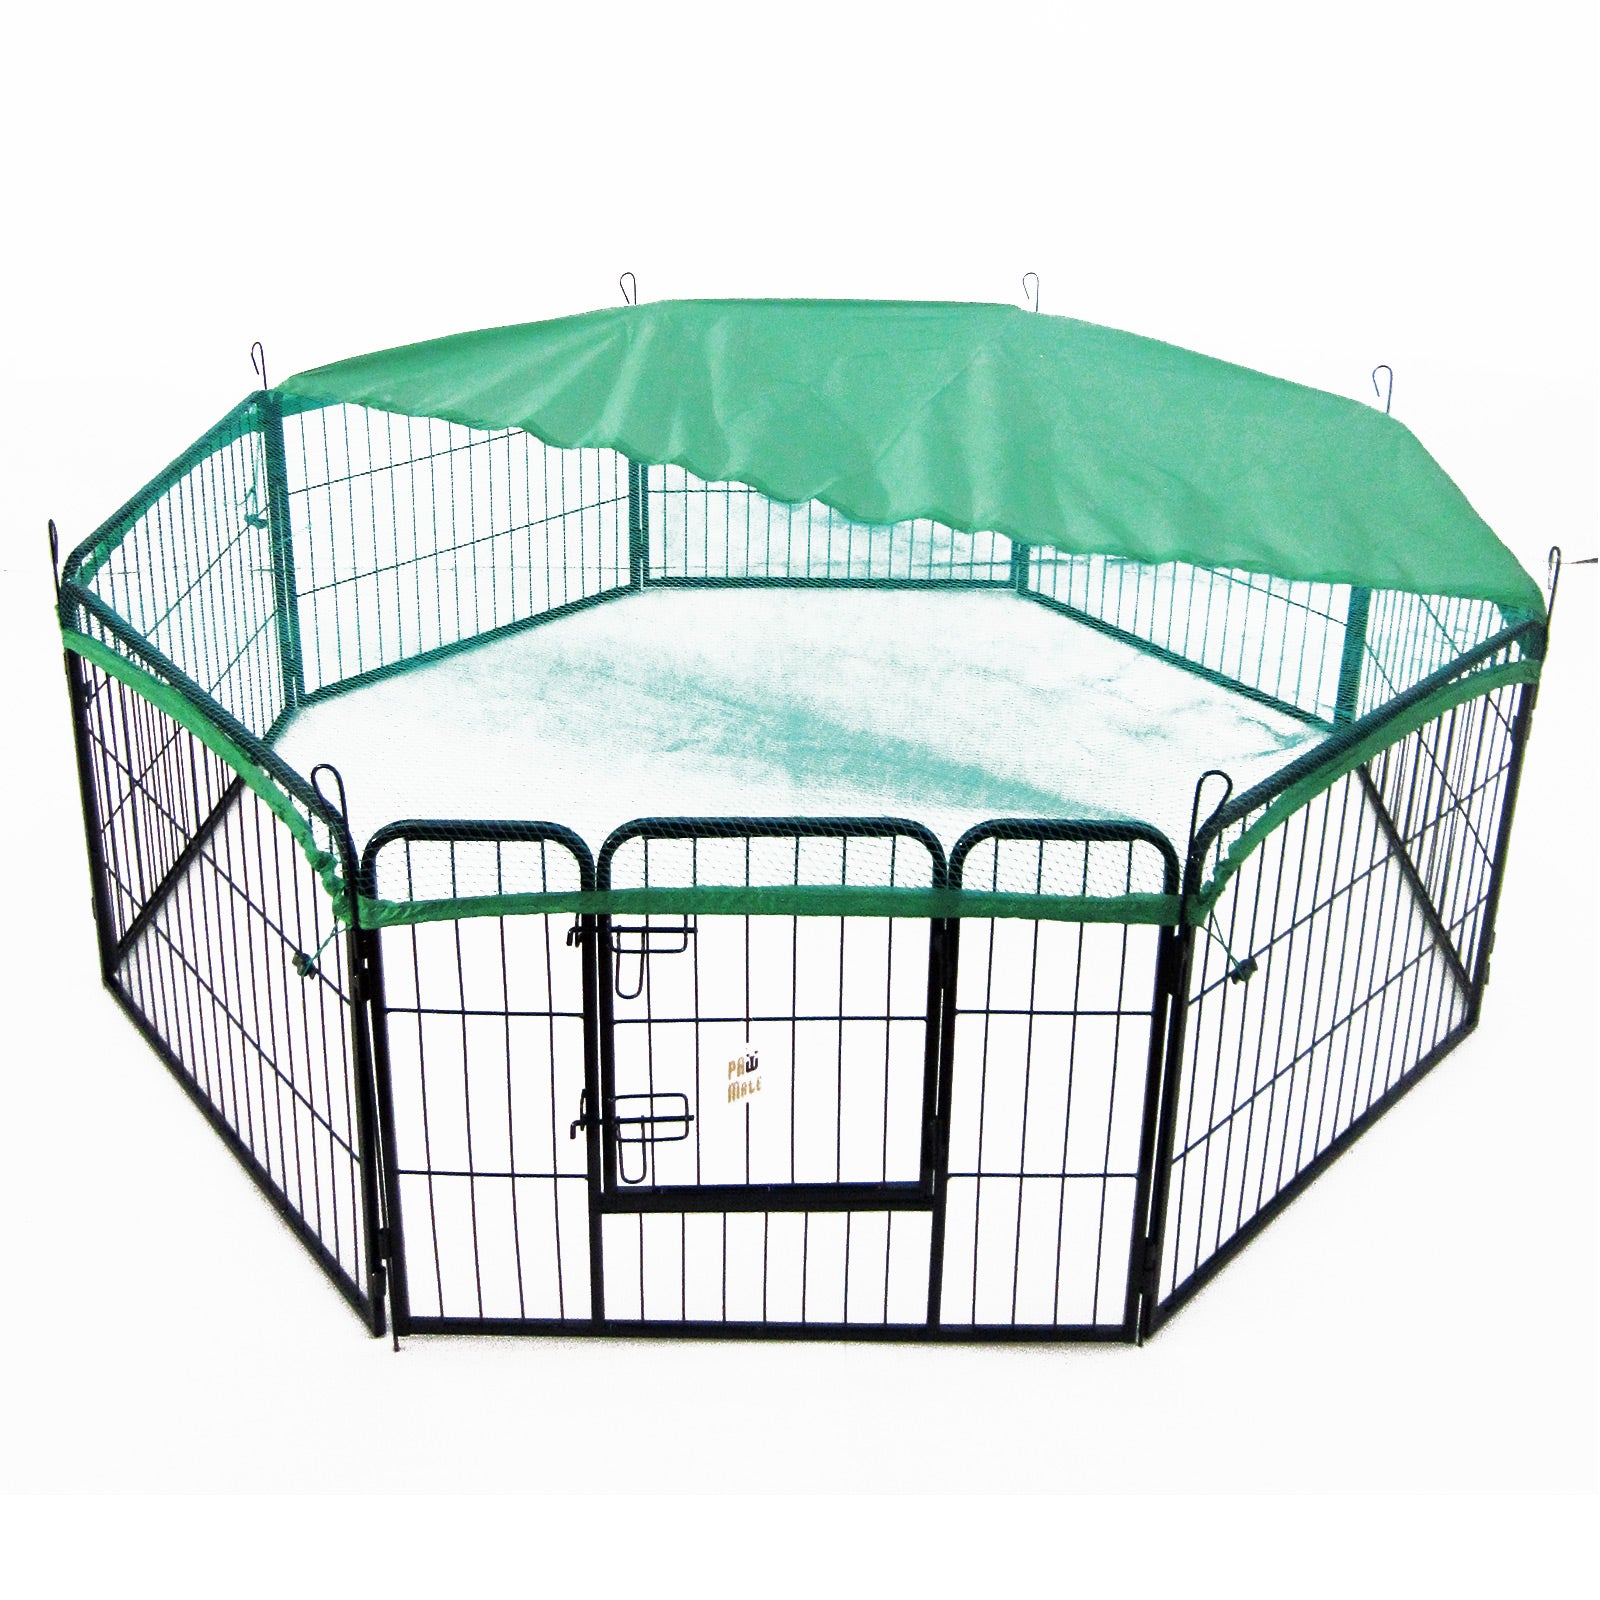 Green Net Cover for Pet Playpen 32in Dog Exercise Enclosure Fence Cage - image2